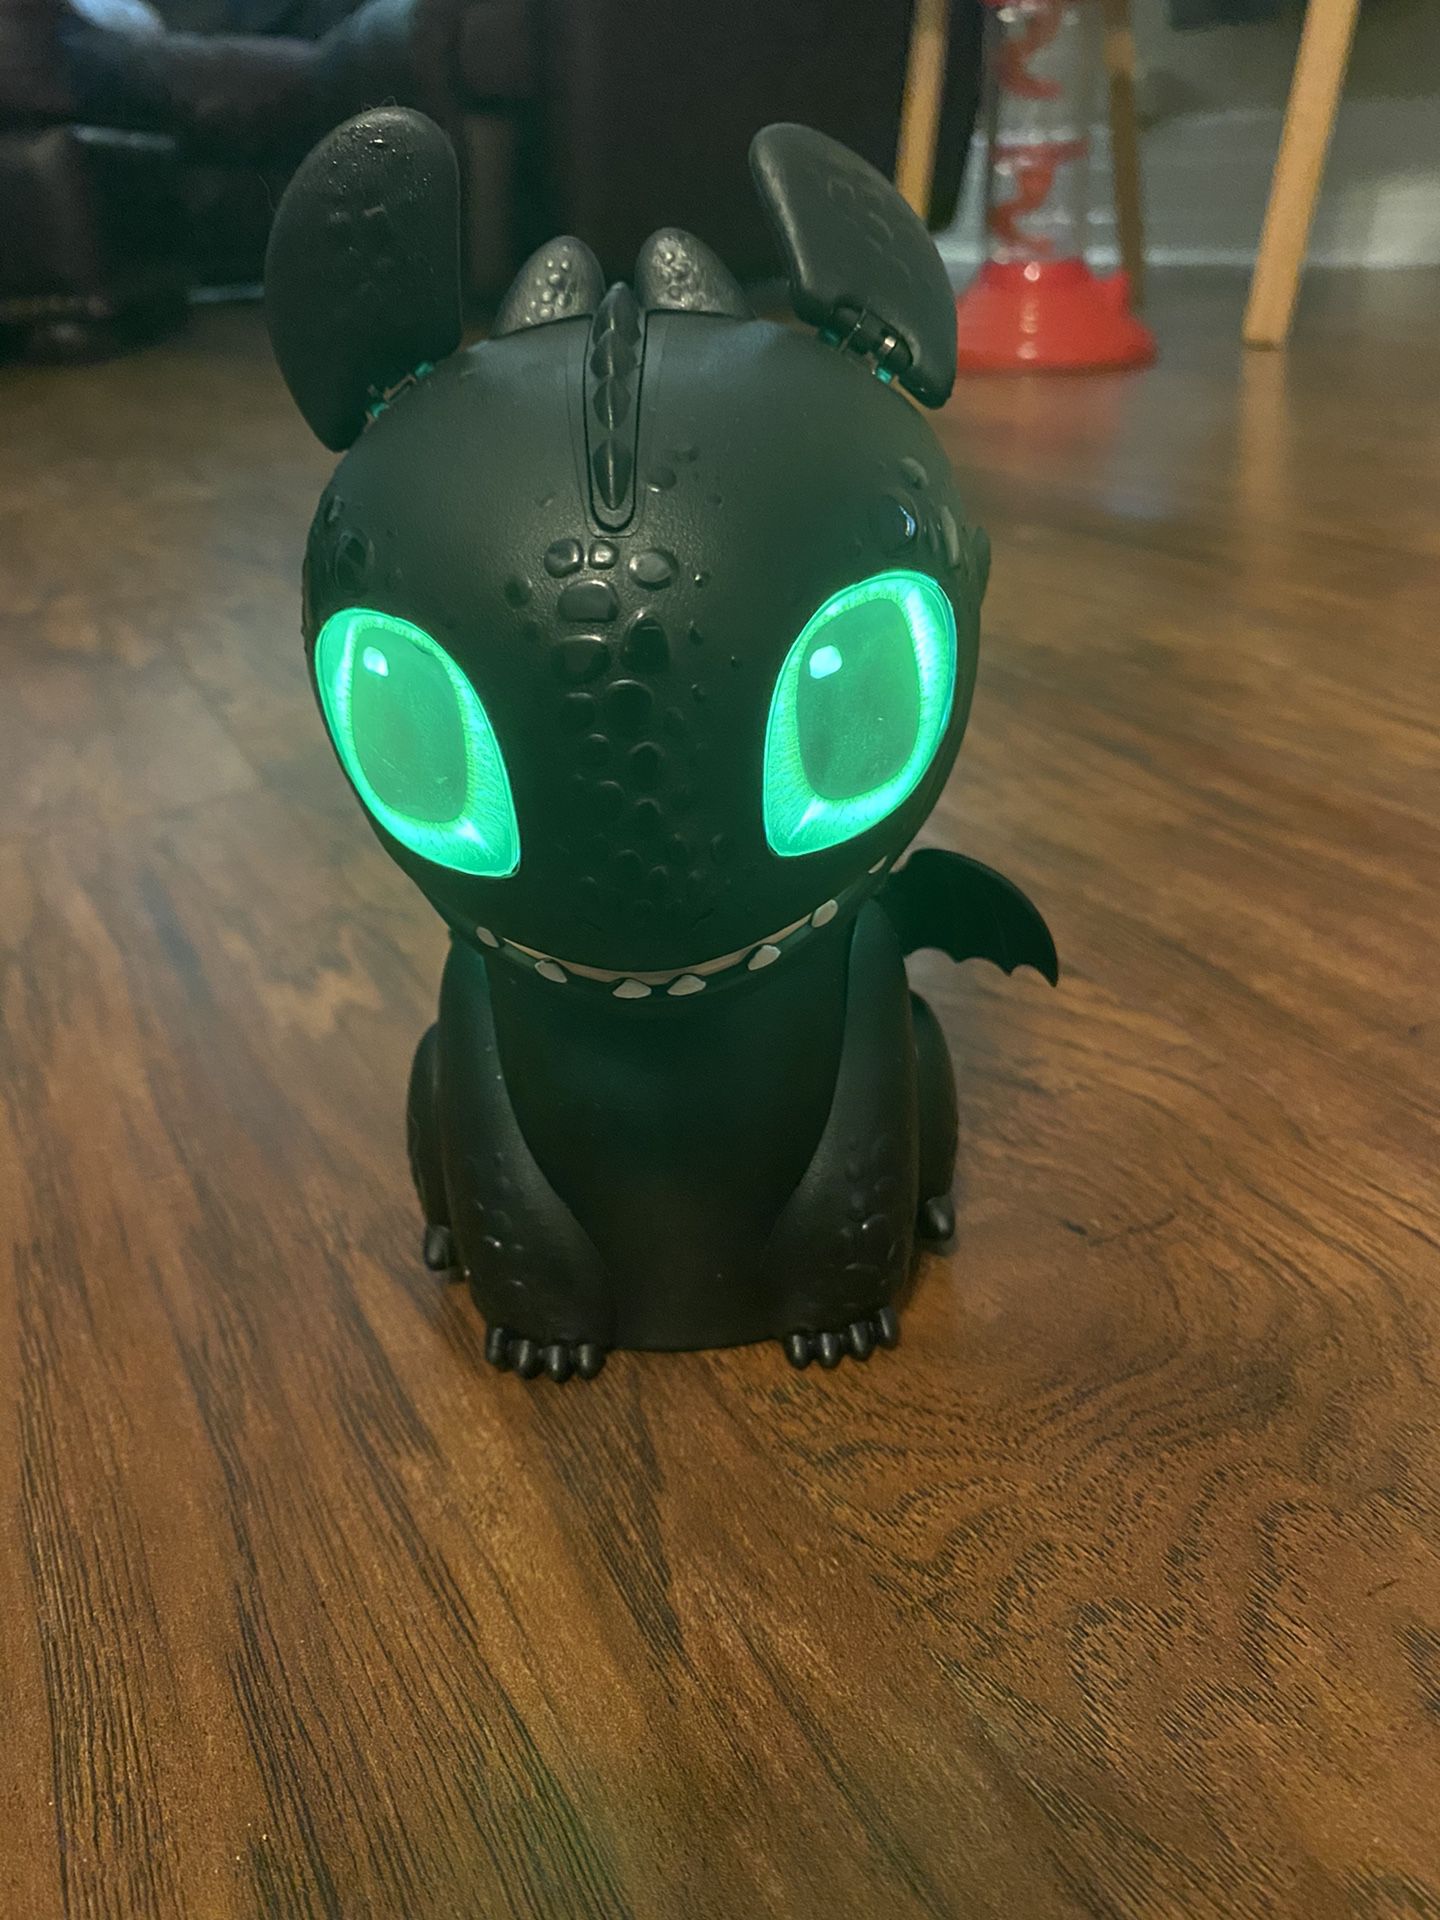 Toothless hatchimal